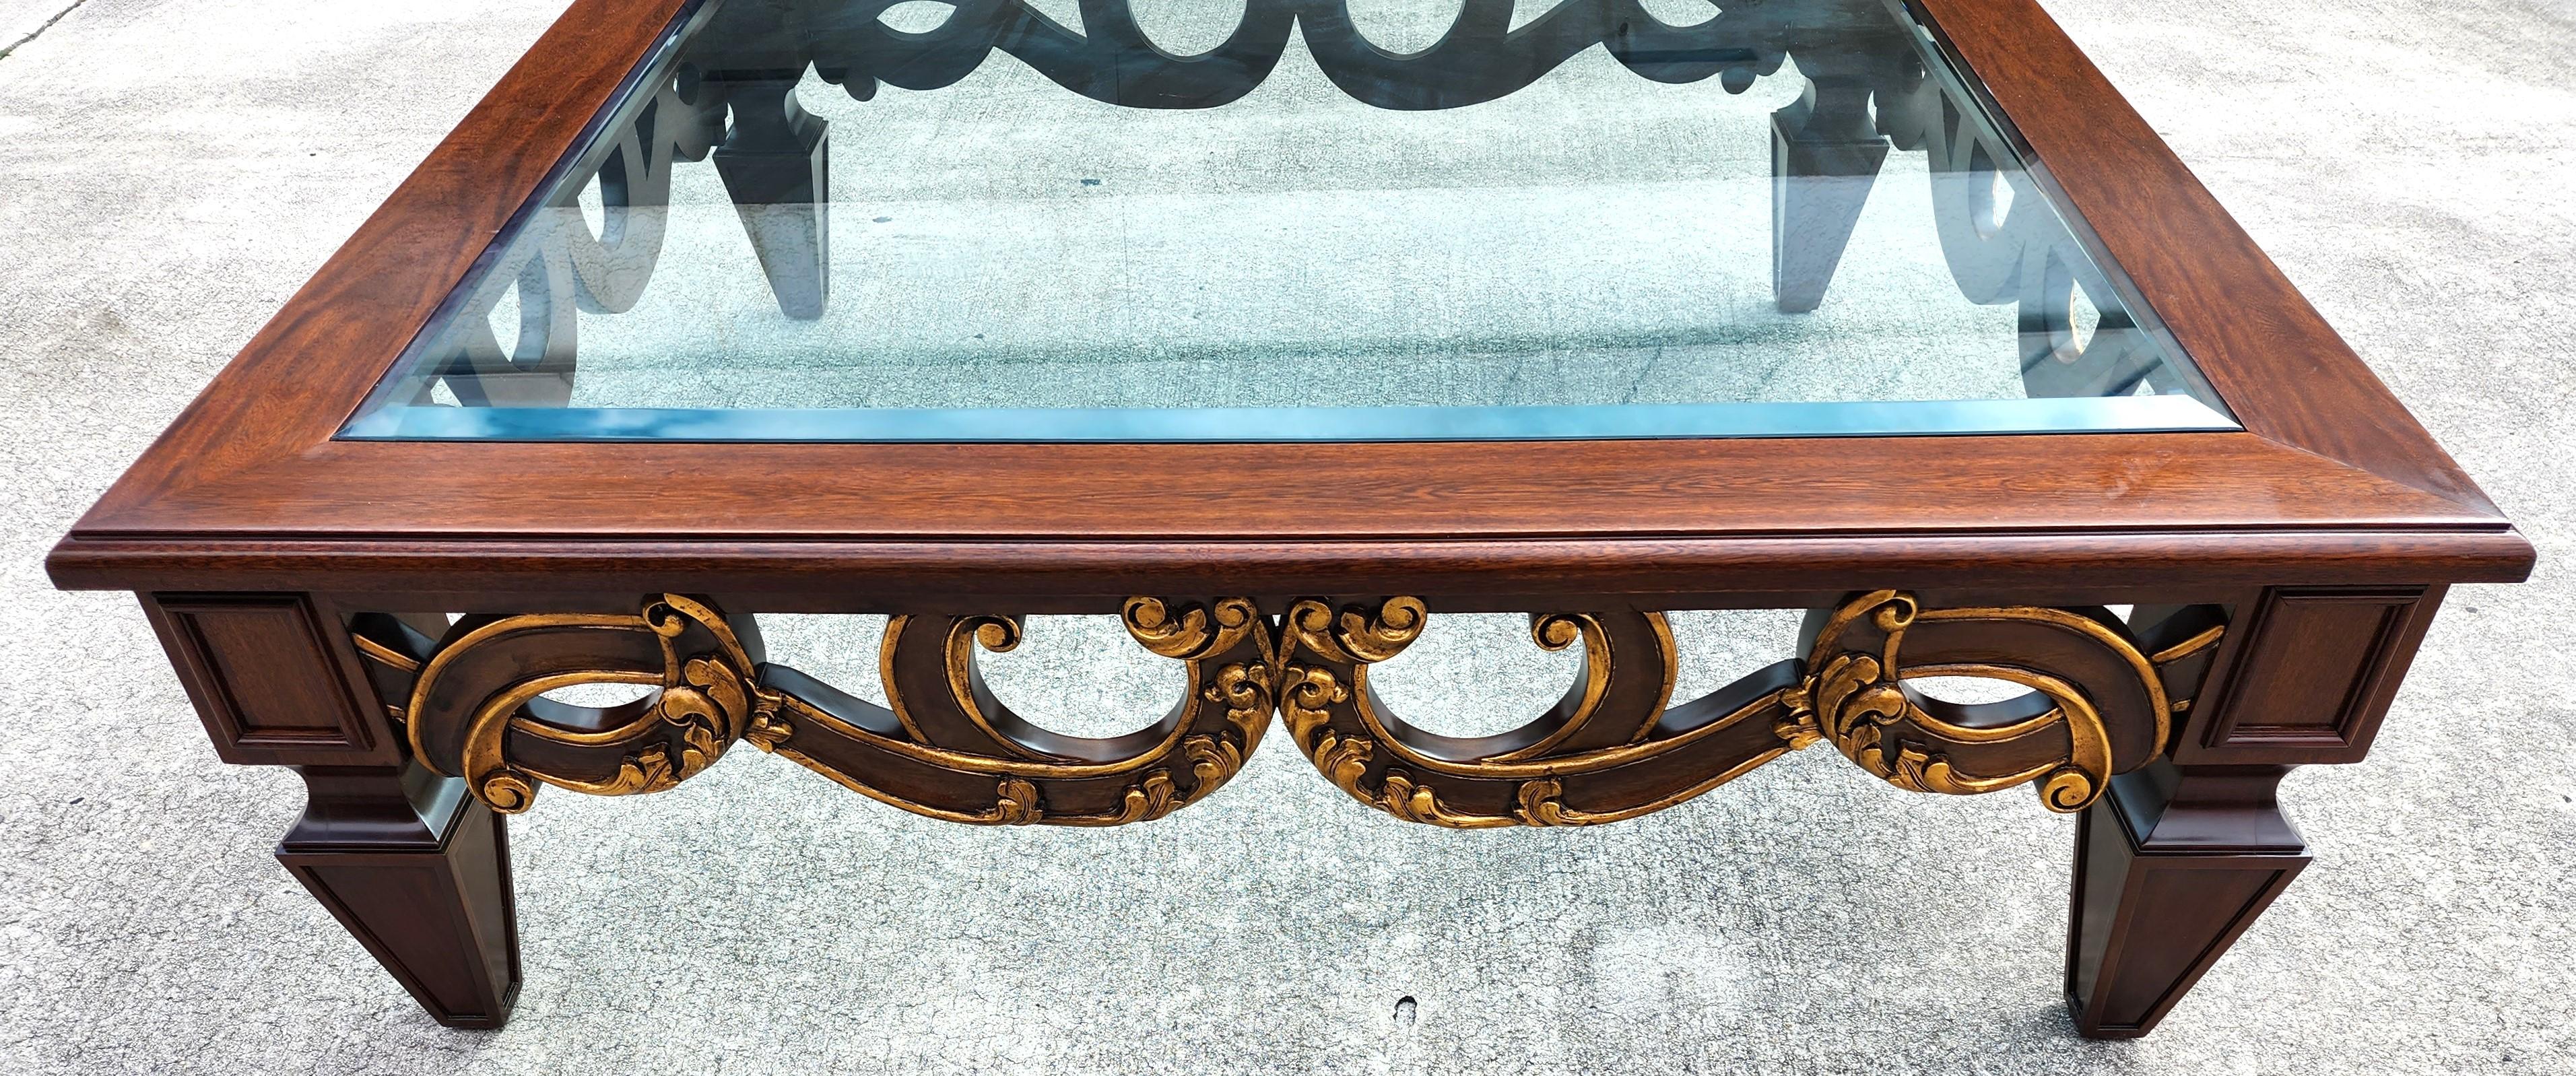 Vintage French Provincial Coffee Table Huge 5 Foot For Sale 3